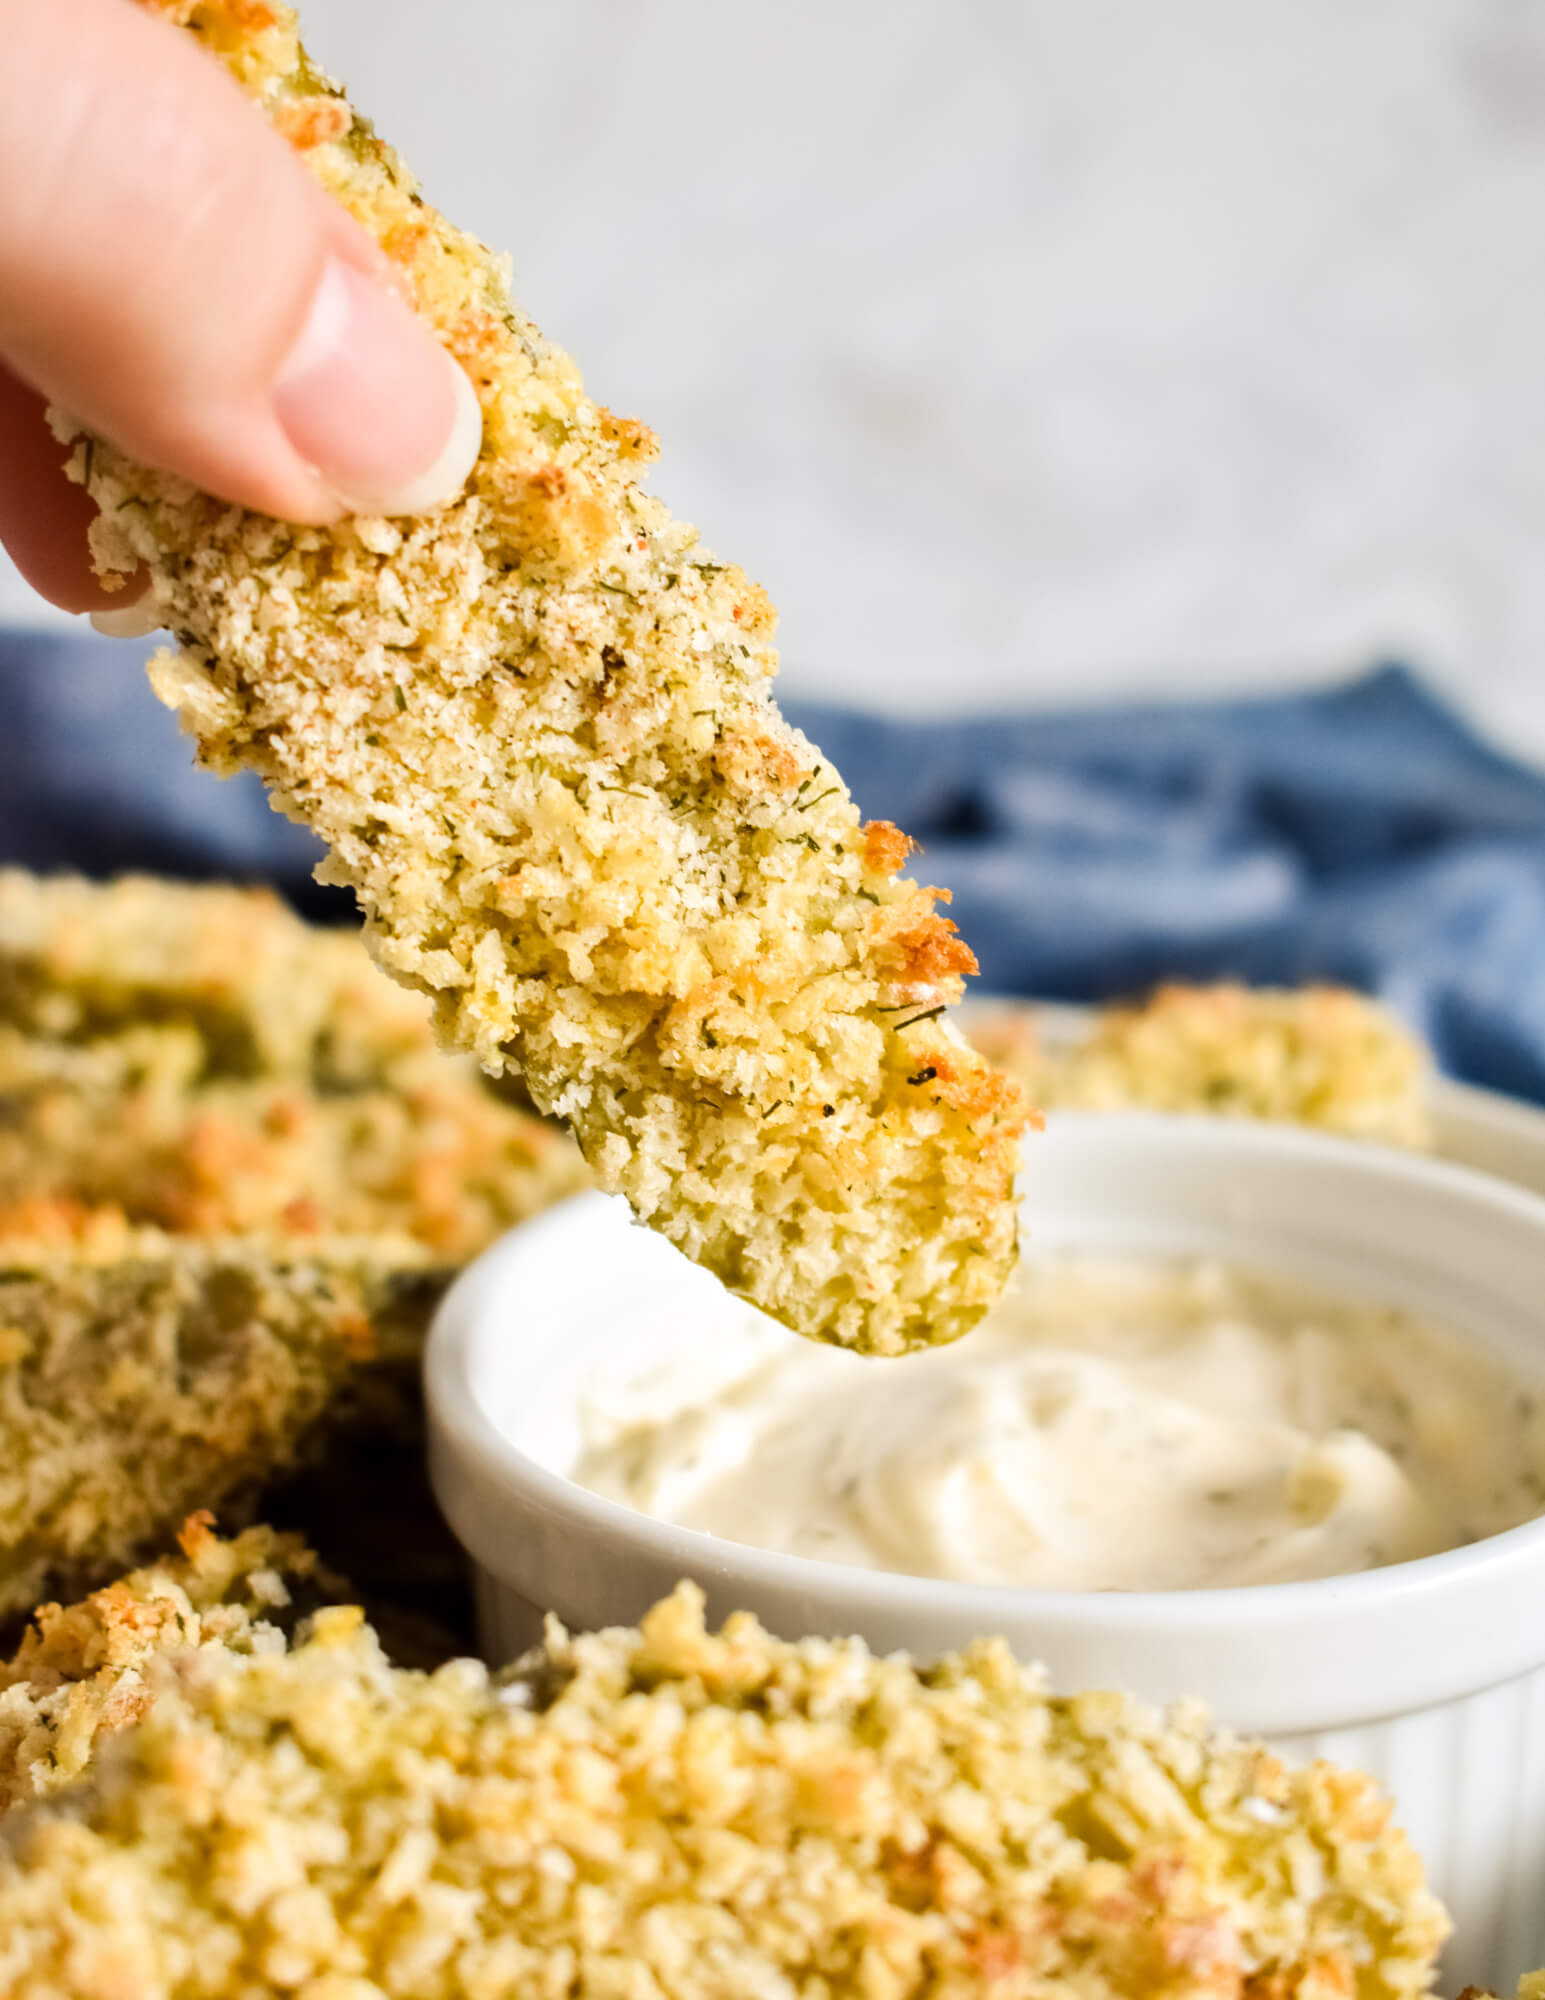 An Oven Fried Pickle being dipped in a creamy ranch dip.